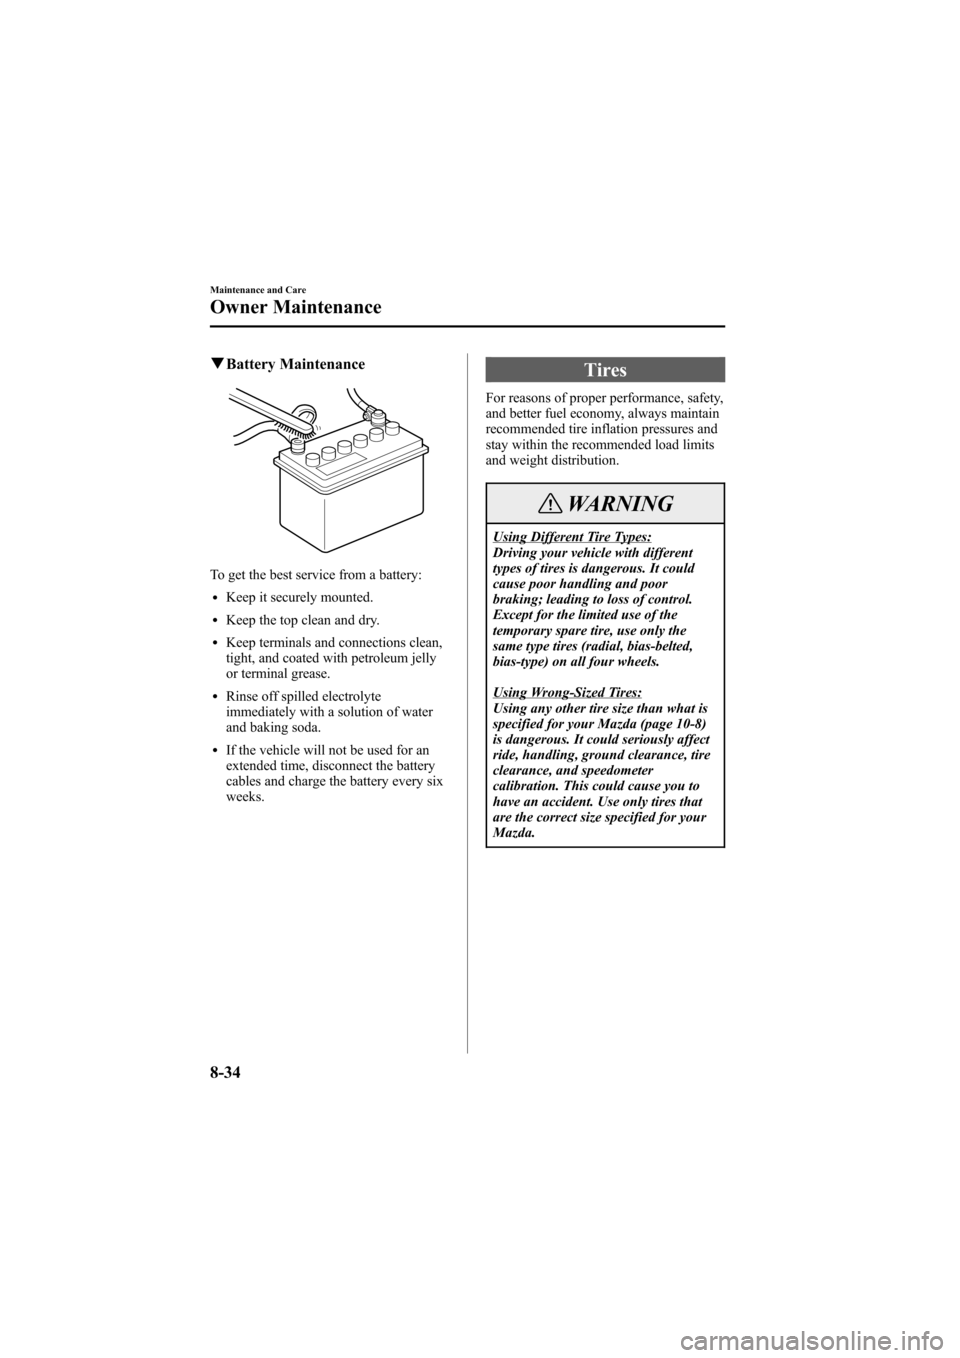 MAZDA MODEL 6 2007  Owners Manual (in English) Black plate (298,1)
qBattery Maintenance
To get the best service from a battery:
lKeep it securely mounted.
lKeep the top clean and dry.
lKeep terminals and connections clean,
tight, and coated with p